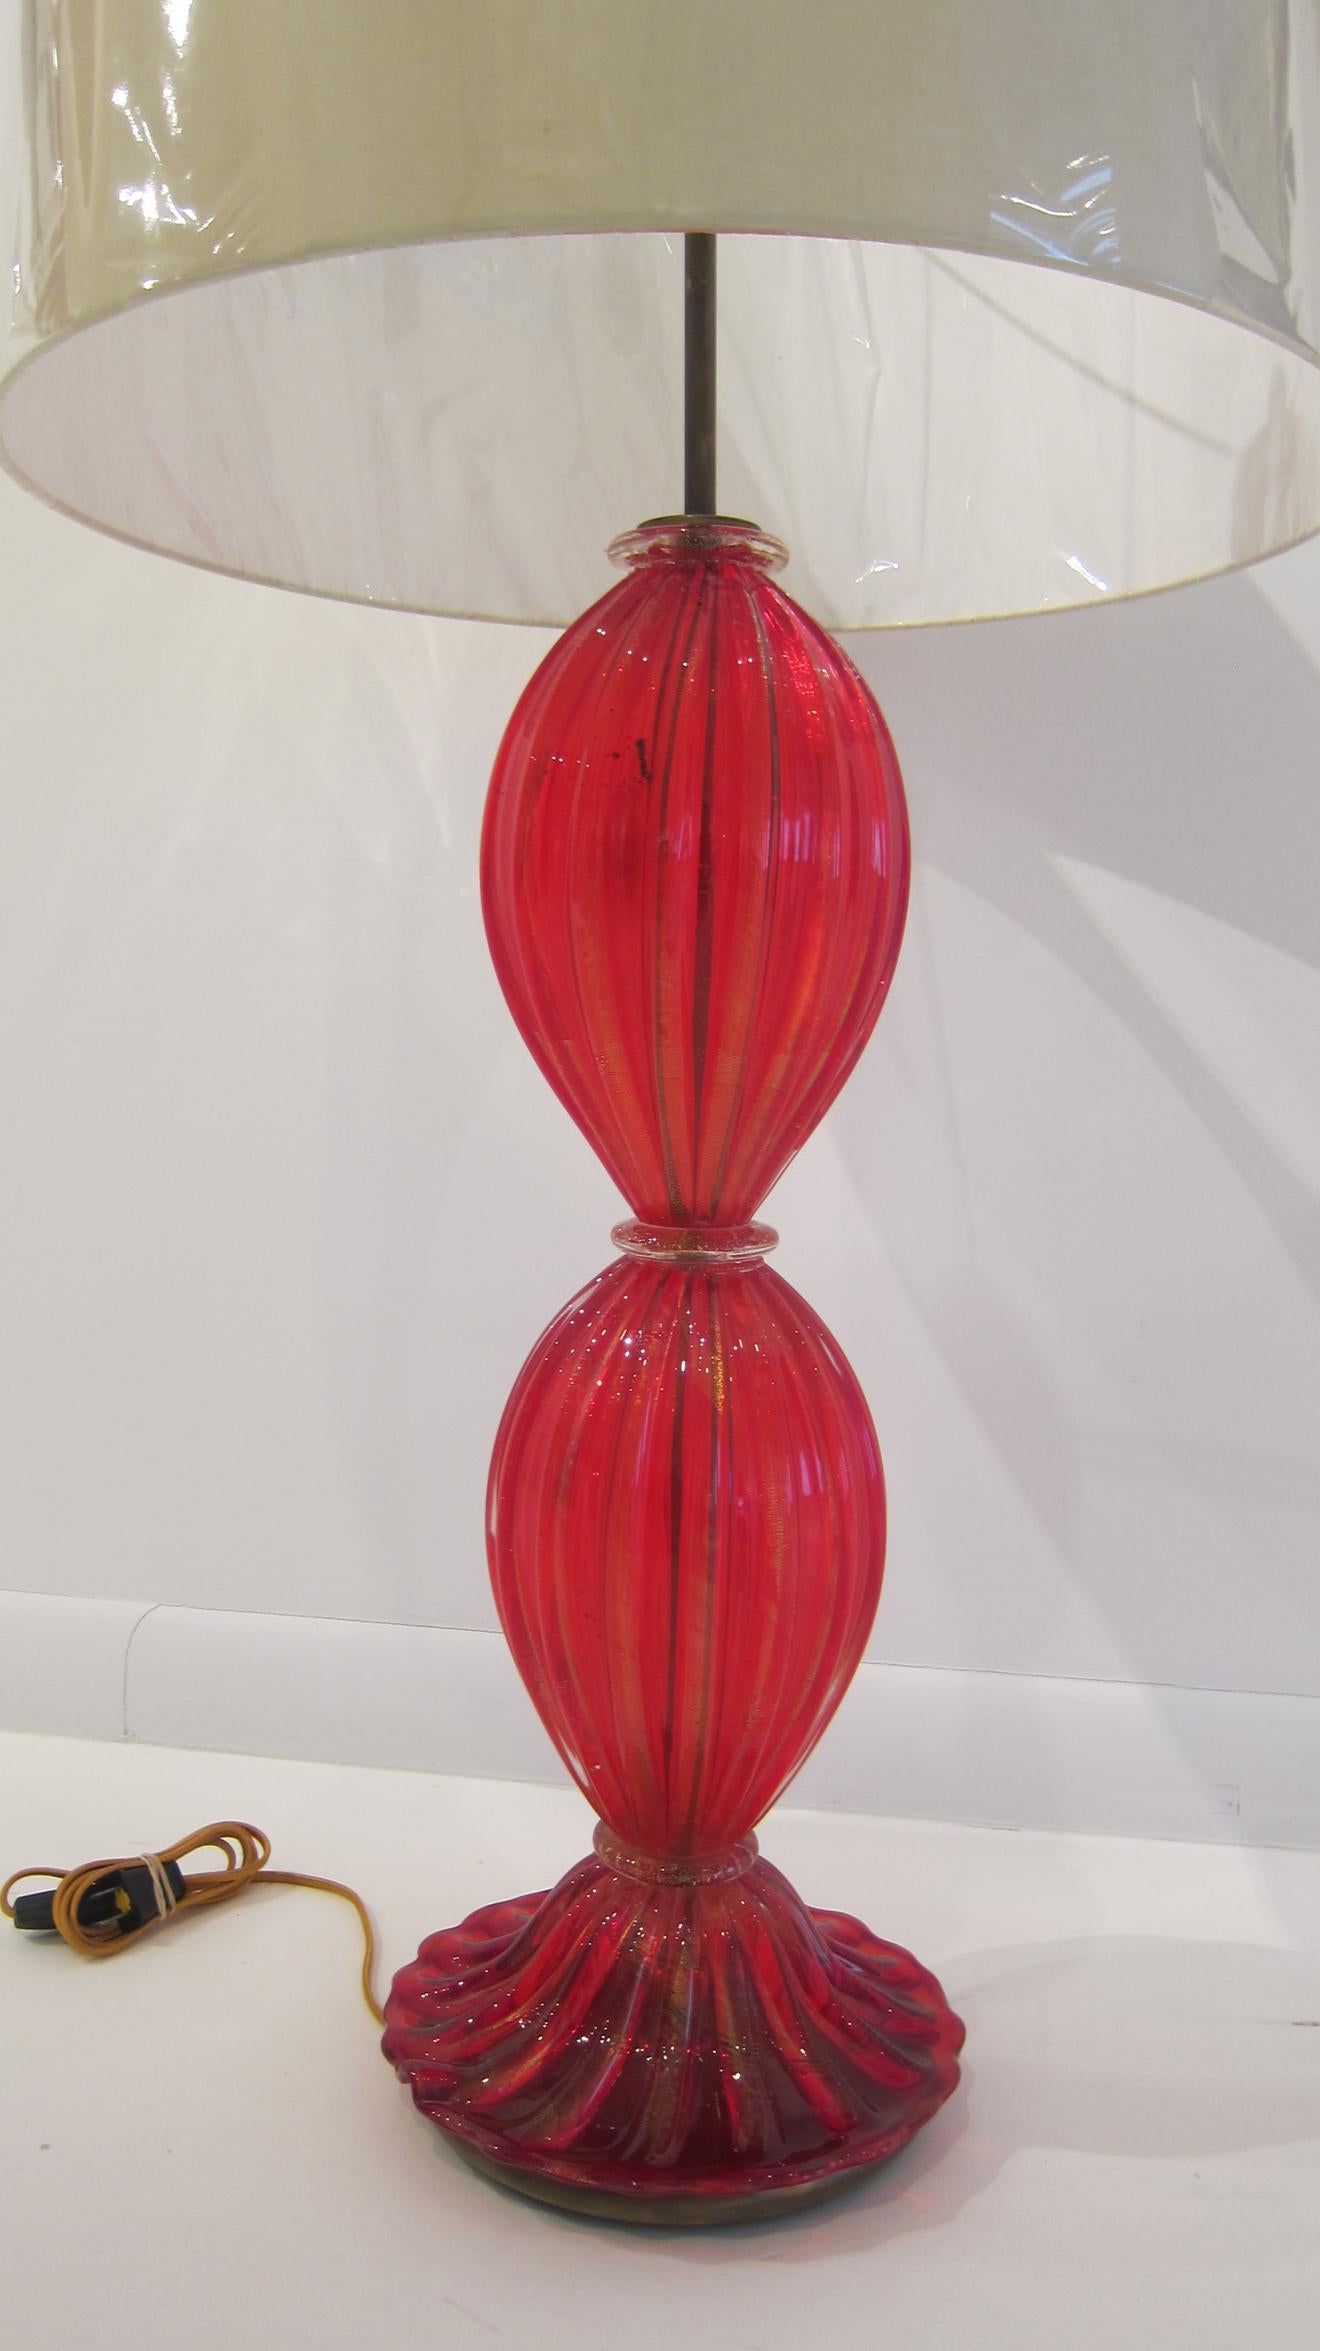 Vibrant red Murano glass table lamp by Barovier e Toso. Newly rewired, signed.
FREE SHIPPING: to Continental US and rest of the world.